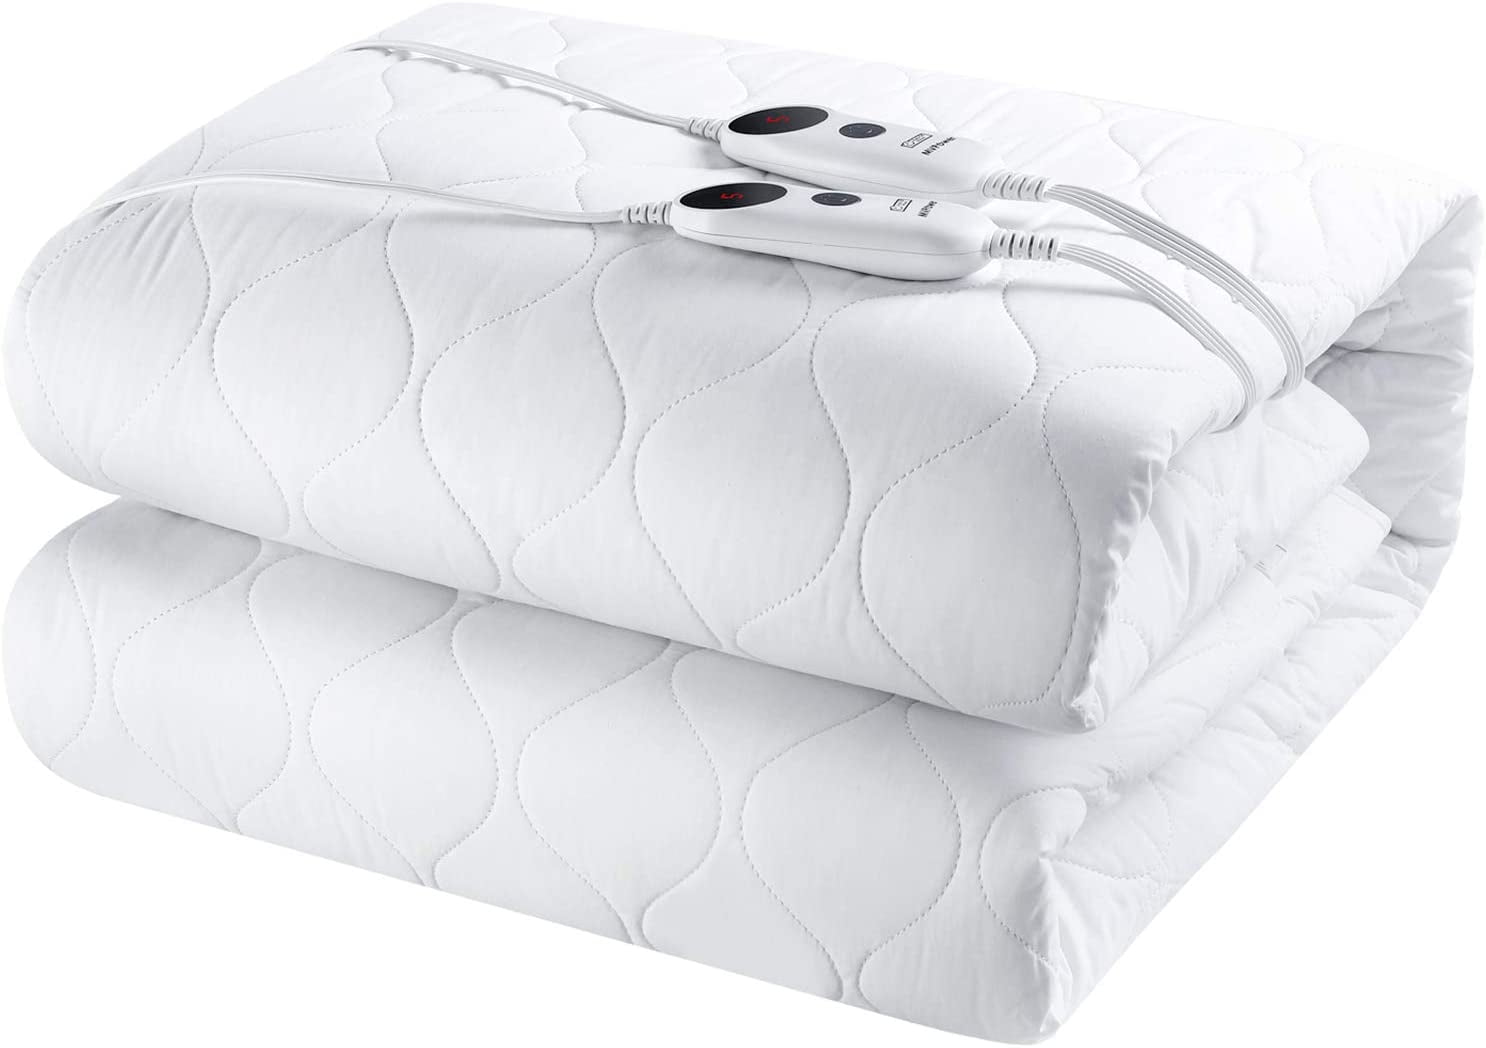 heated mattress pad goes under fitted sheet